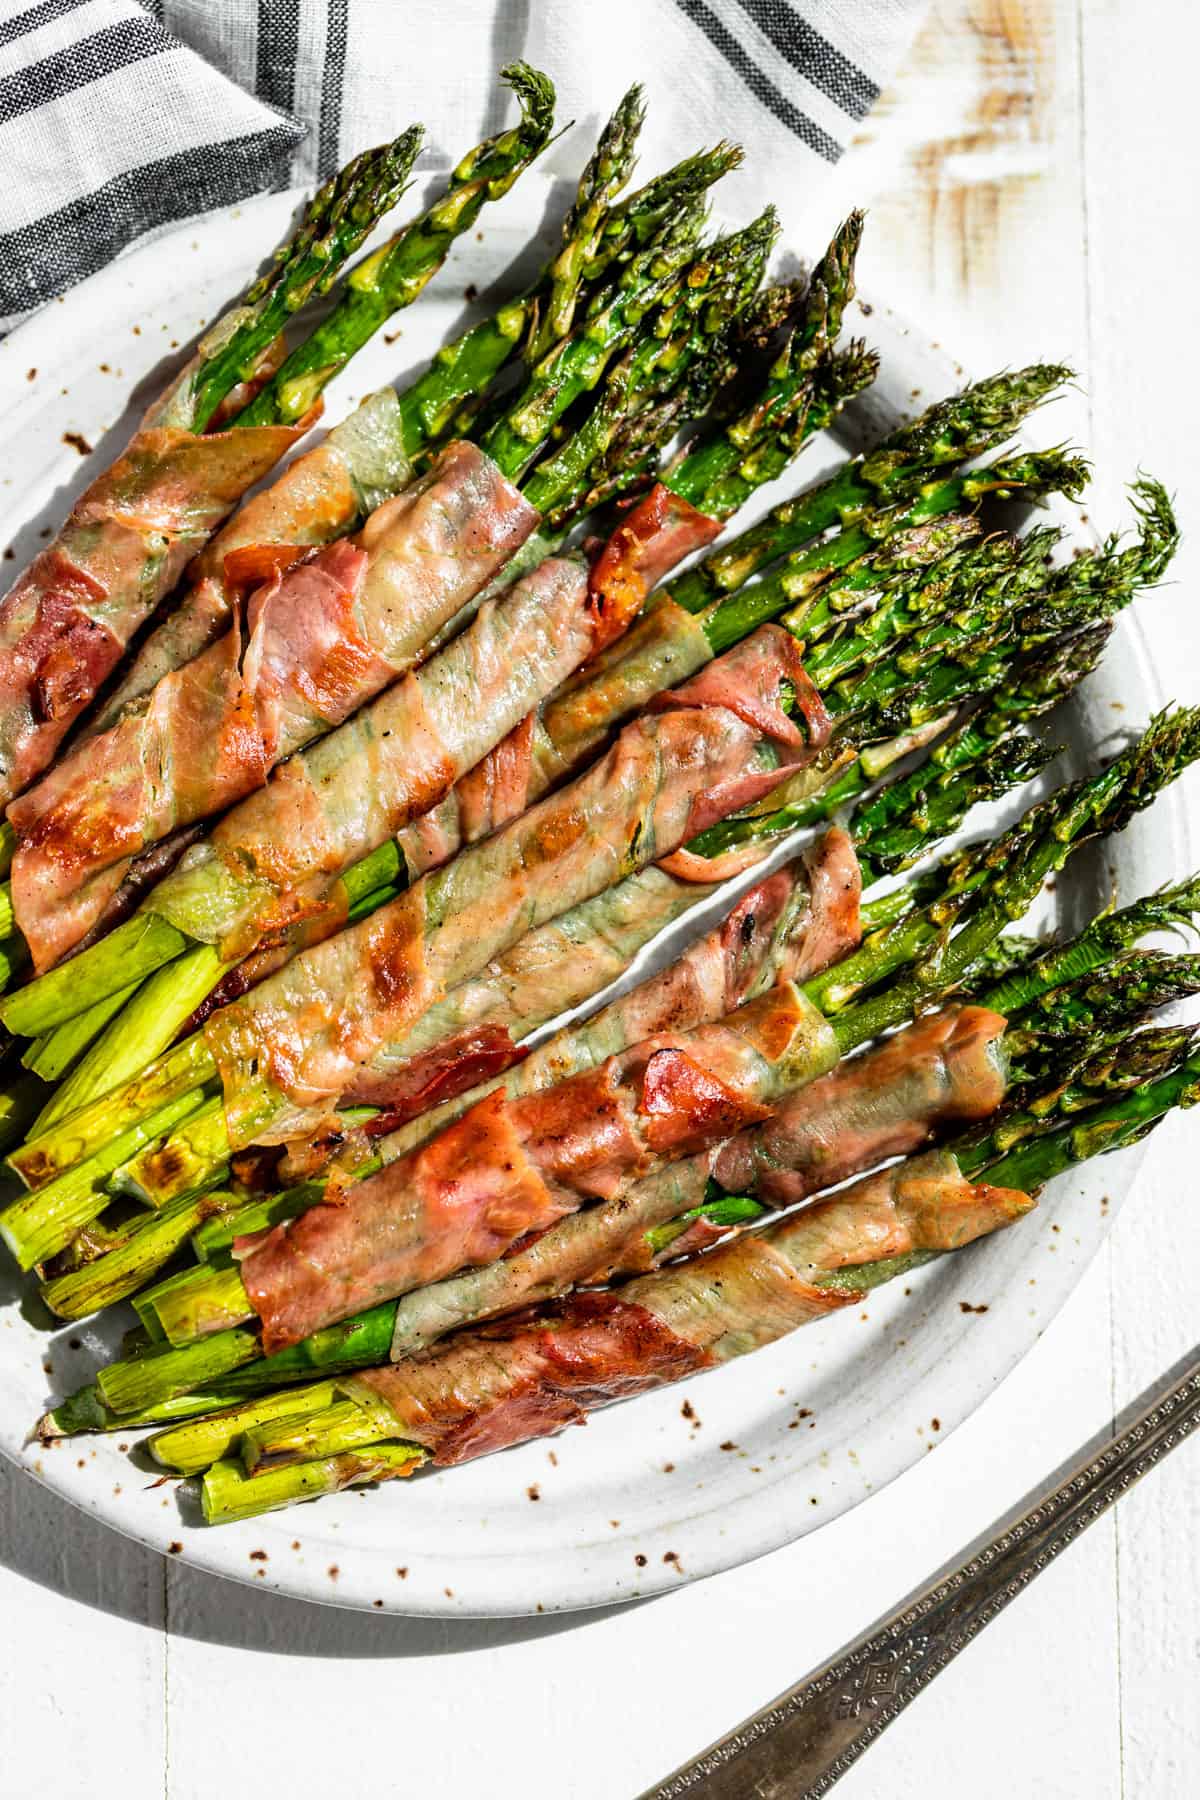 Looking down at Prosciutto Wrapped Asparagus spears arranged on a speckled pottery plate.